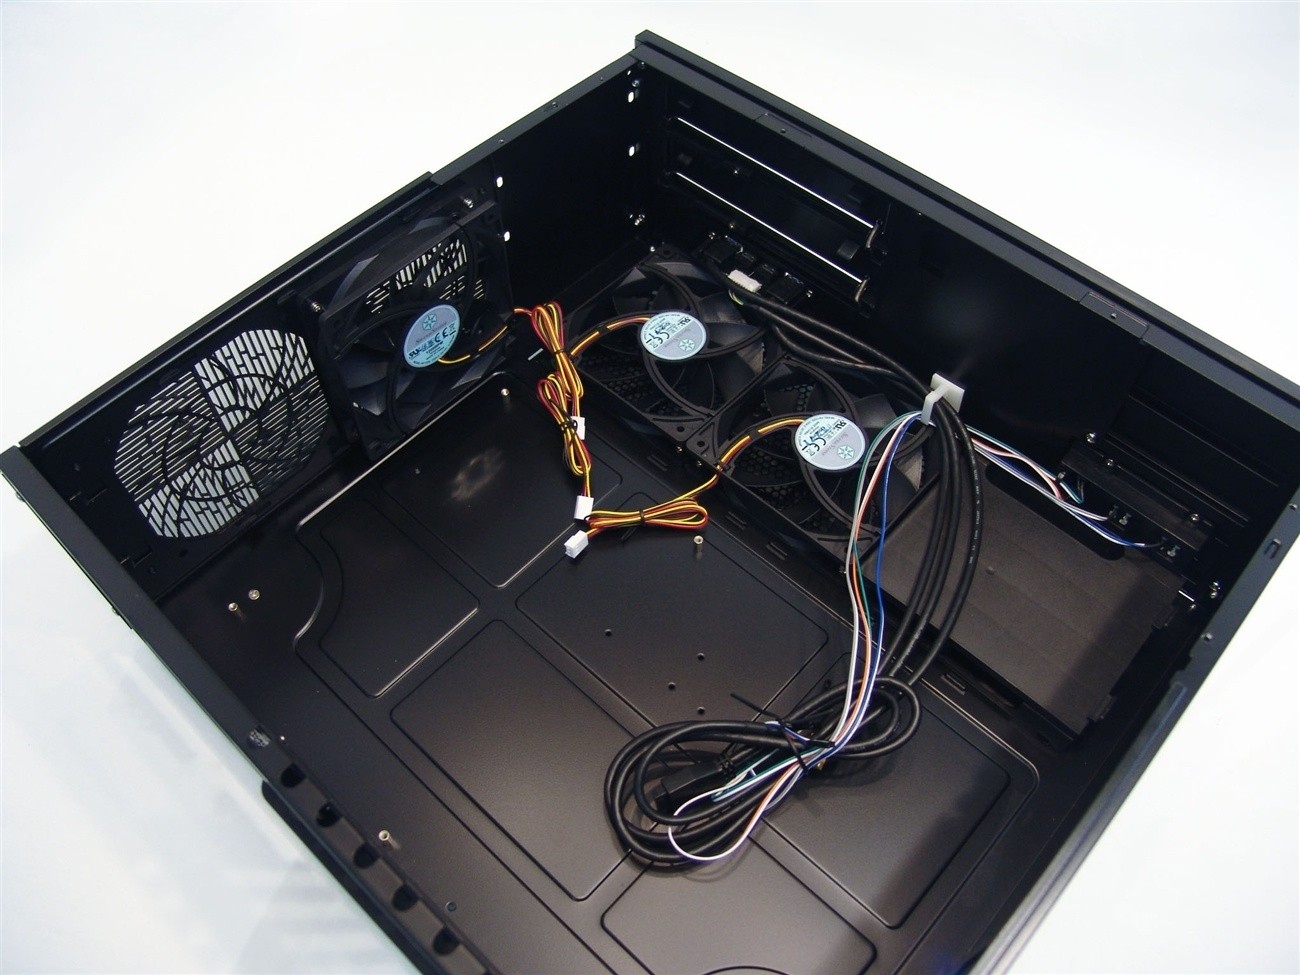 SilverStone Grandia SST-GD08B HTPC Chassis Review